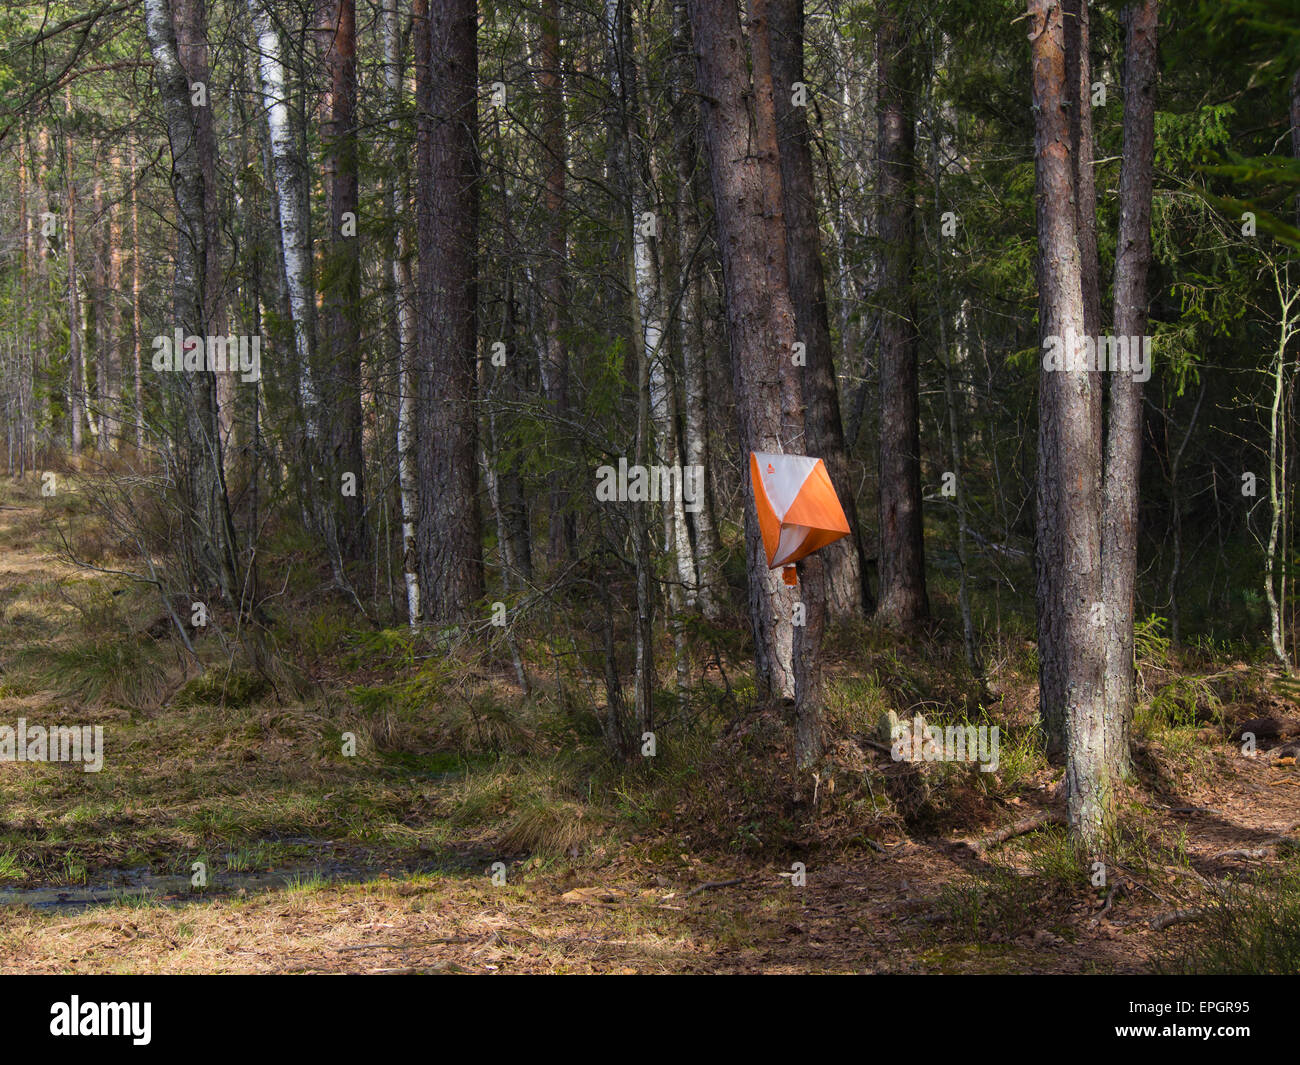 The international Orienteering flag marking a control point in the Norwegian forest near Oslo Norway Stock Photo